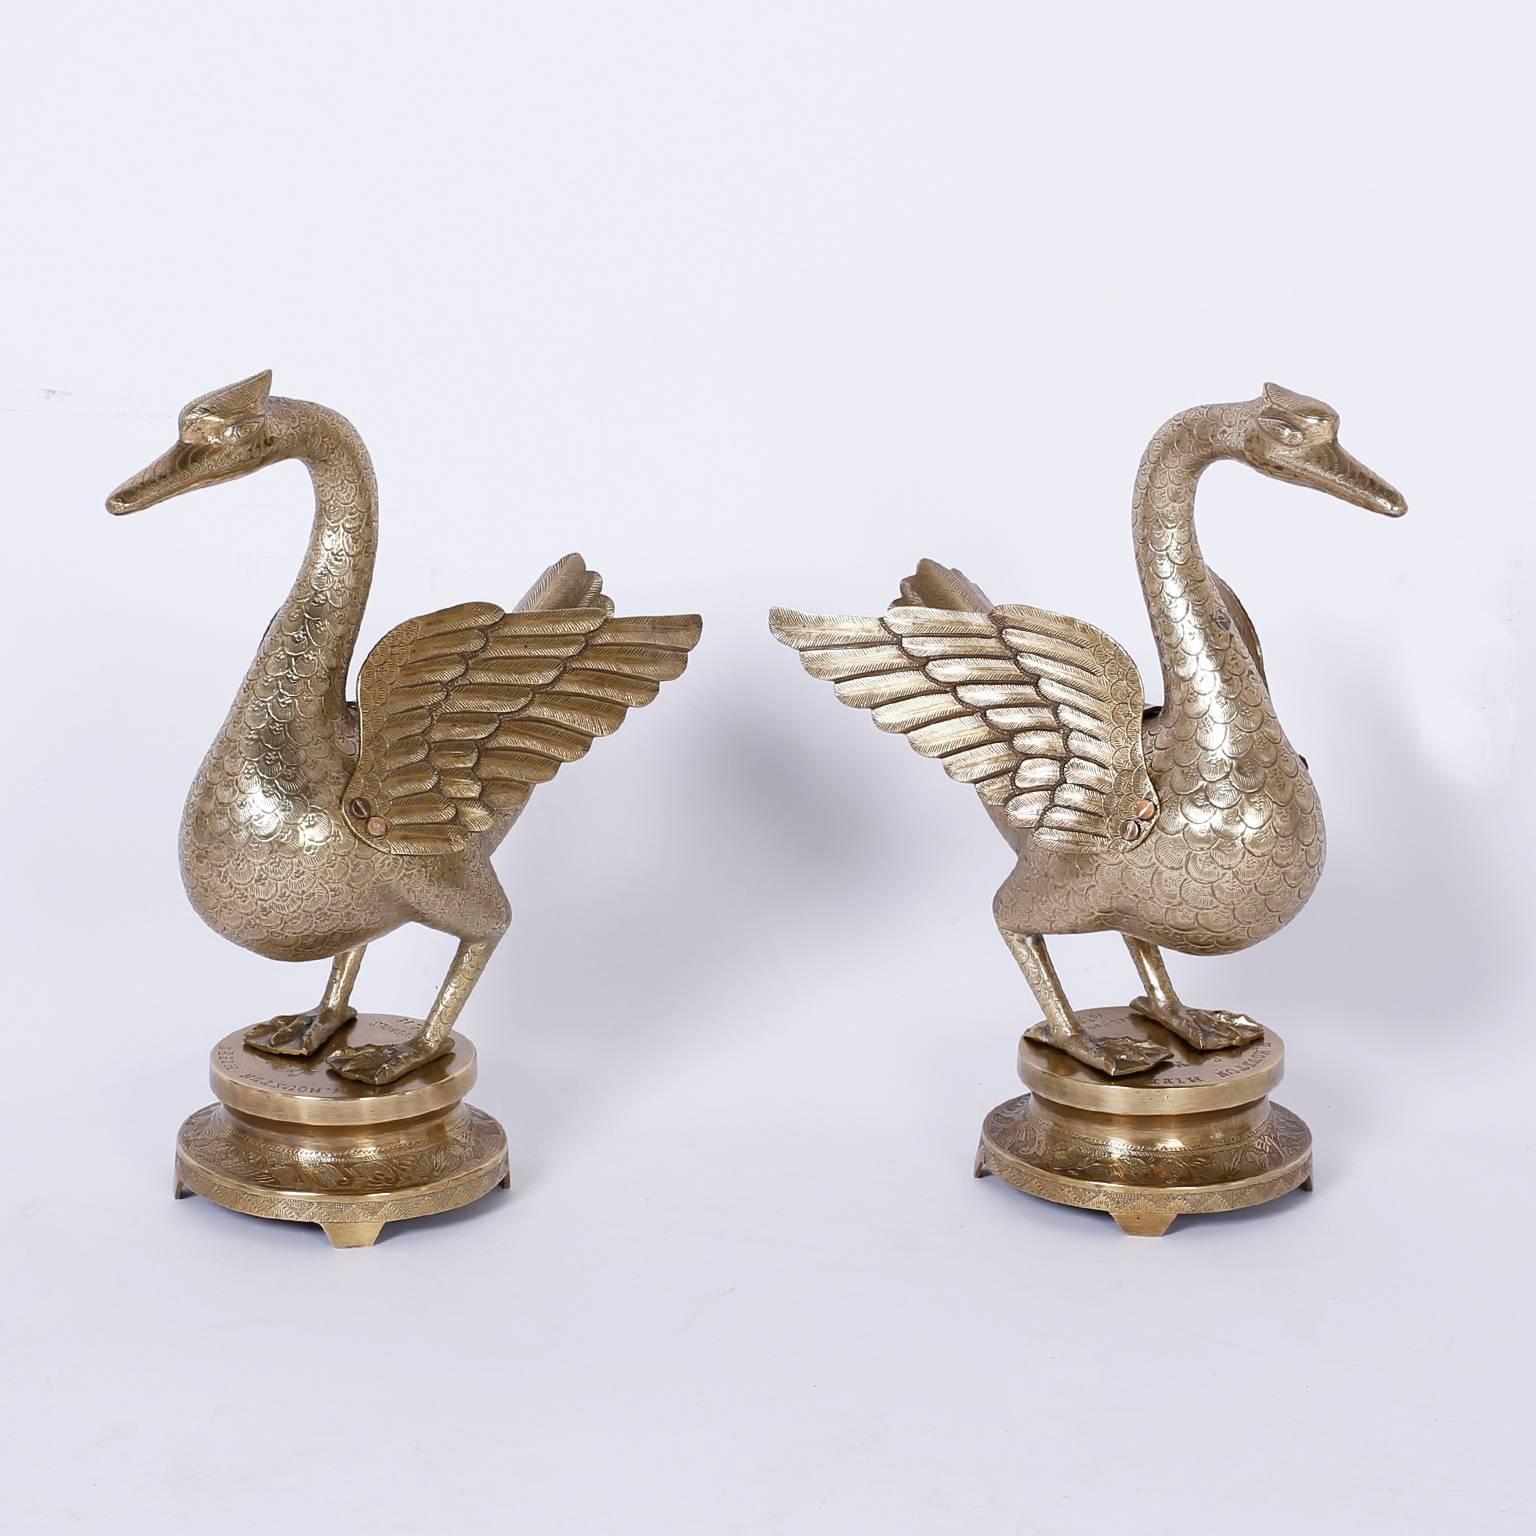 Intriguing pair of antique Anglo-Indian ducks or birds with a
confident stance and engraved details, featuring removable lids and
round classes stands that show evidence these where gifted in 1912.